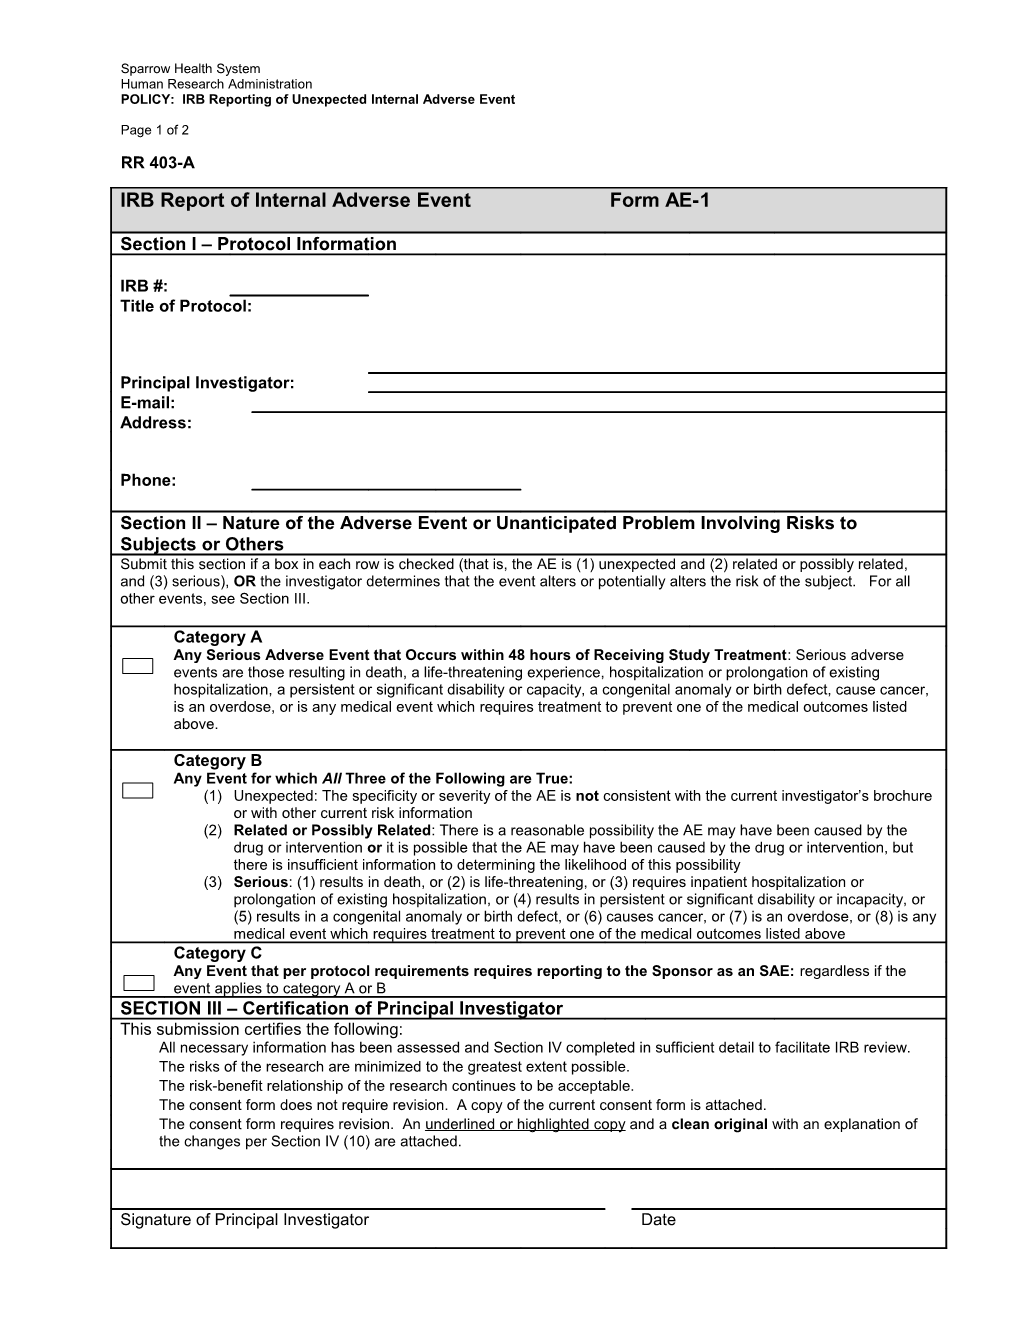 IRB Report of Unexpected Internal Adverse Event Form AE-1